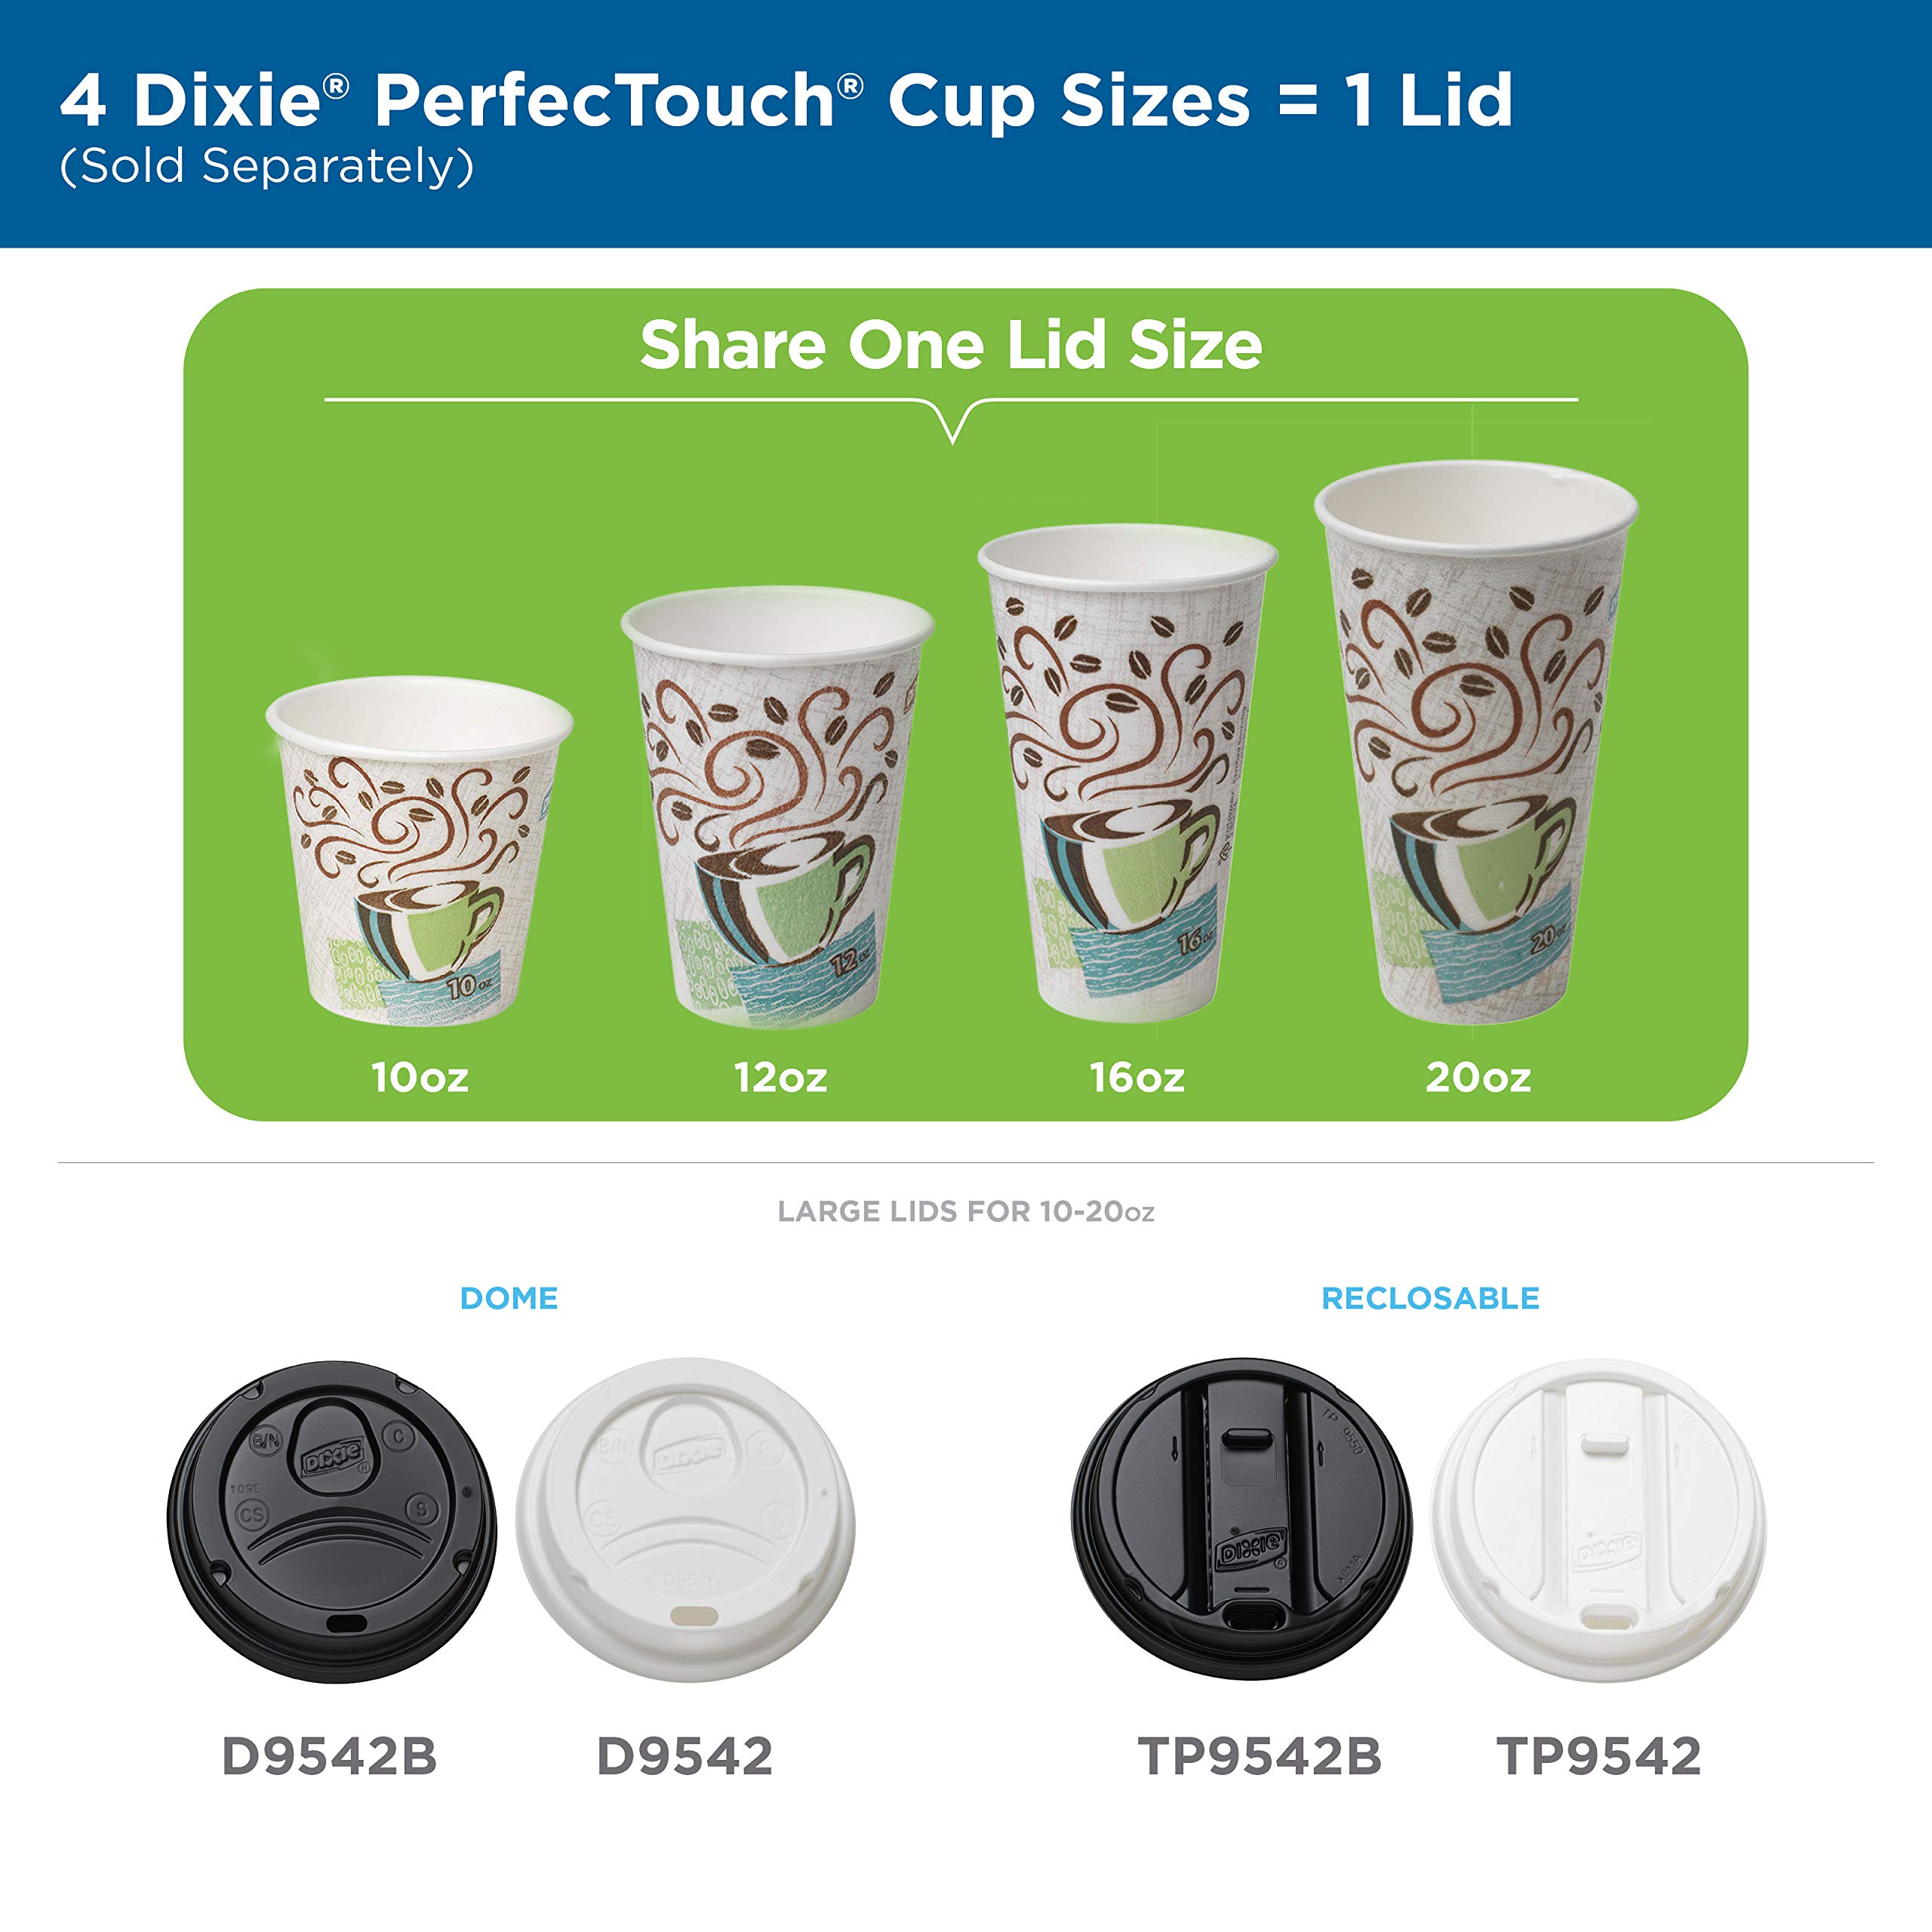 Dixie PerfecTouch 12 Oz Insulated Paper Hot Coffee Cup by GP PRO (Georgia-Pacific); Coffee Haze; 5342DX; 500 Count (25 Cups Per Sleeve; 20 Sleeves Per Case)